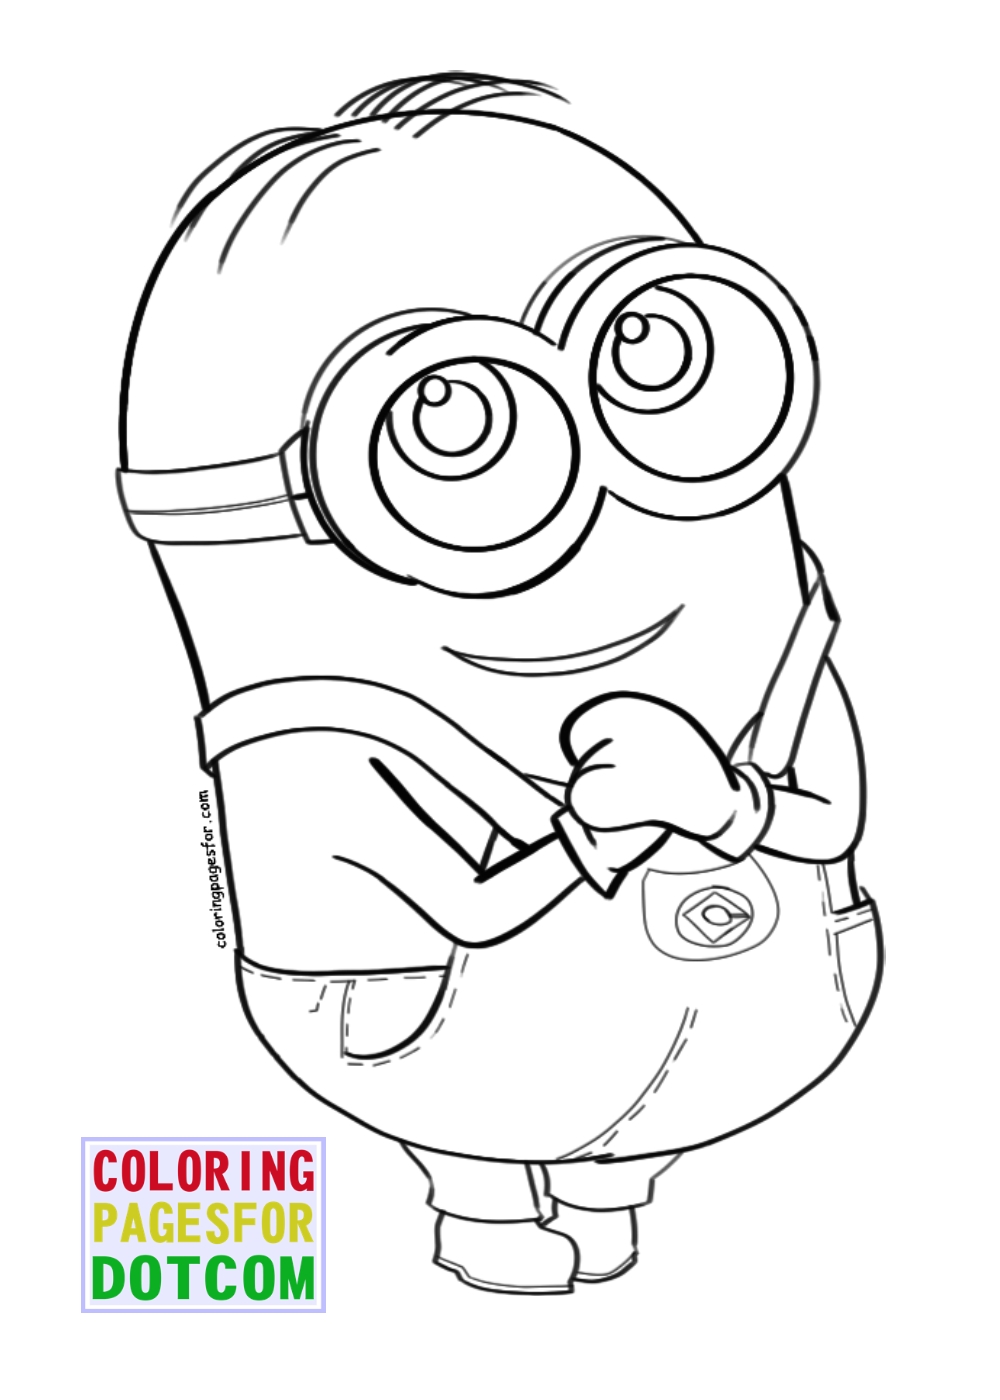 Minions coloring pages by blackartist on